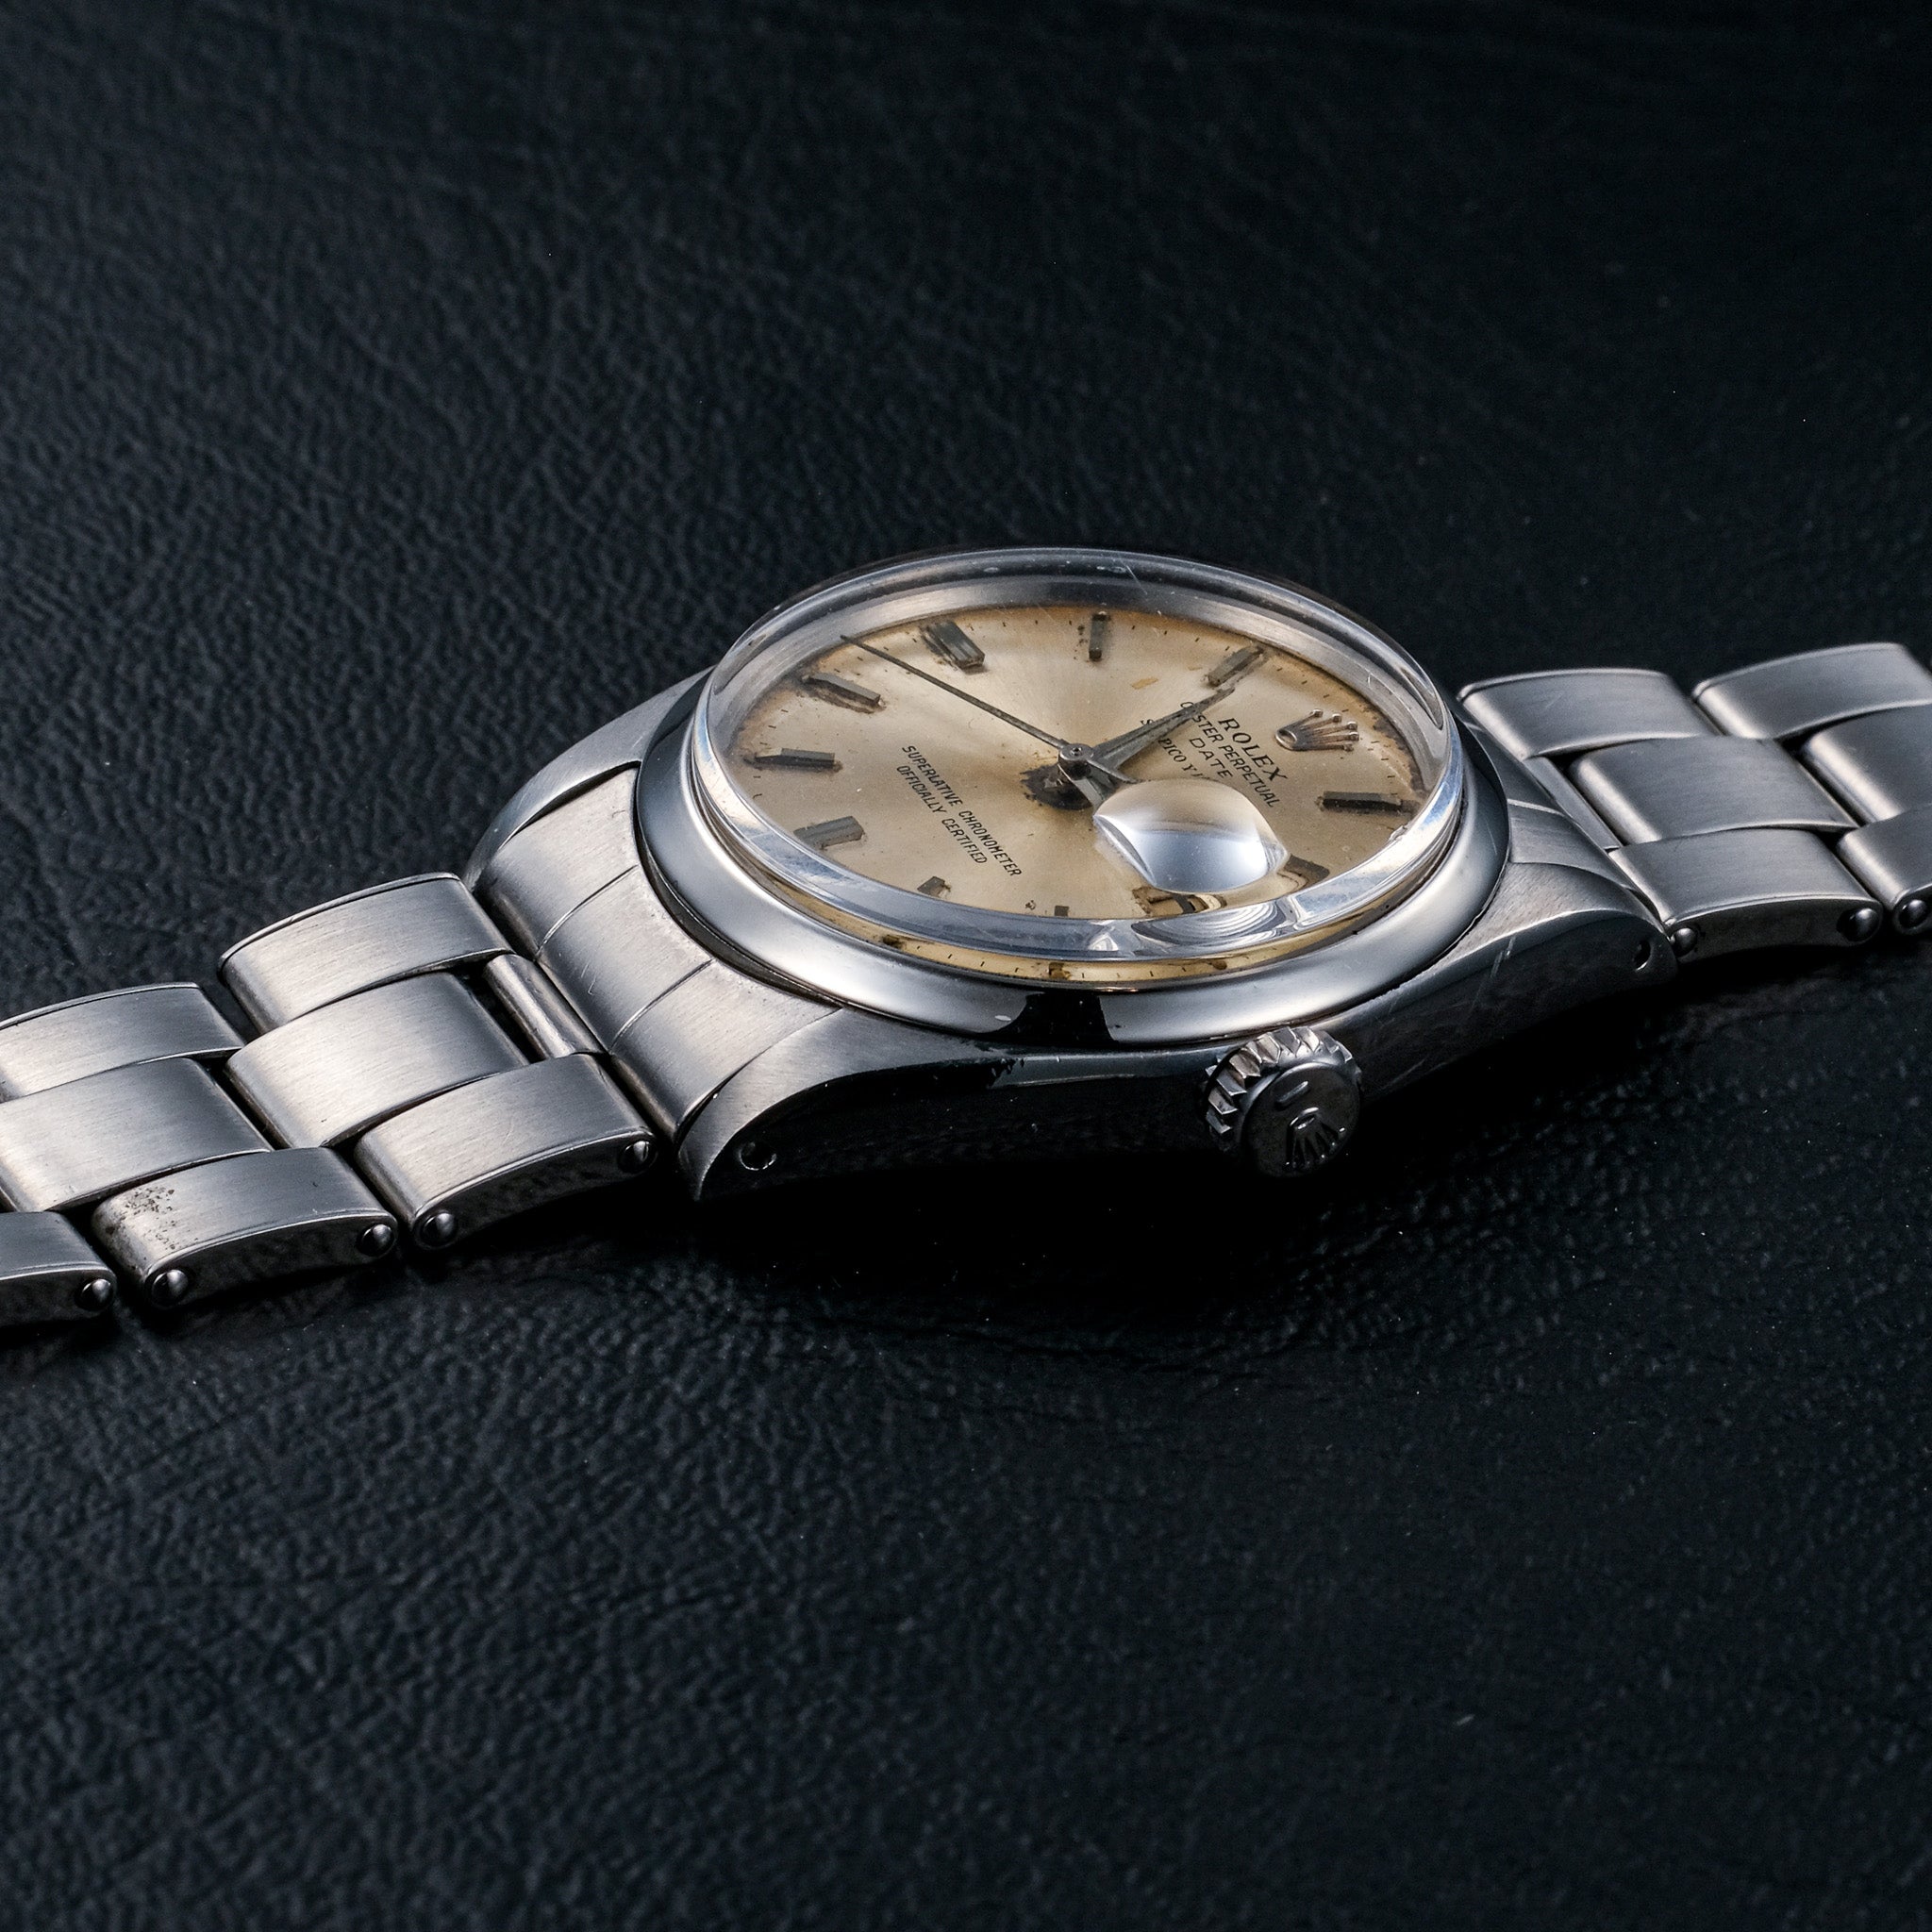 Rolex Oyster Perpetual Date "Serpico y Laino"